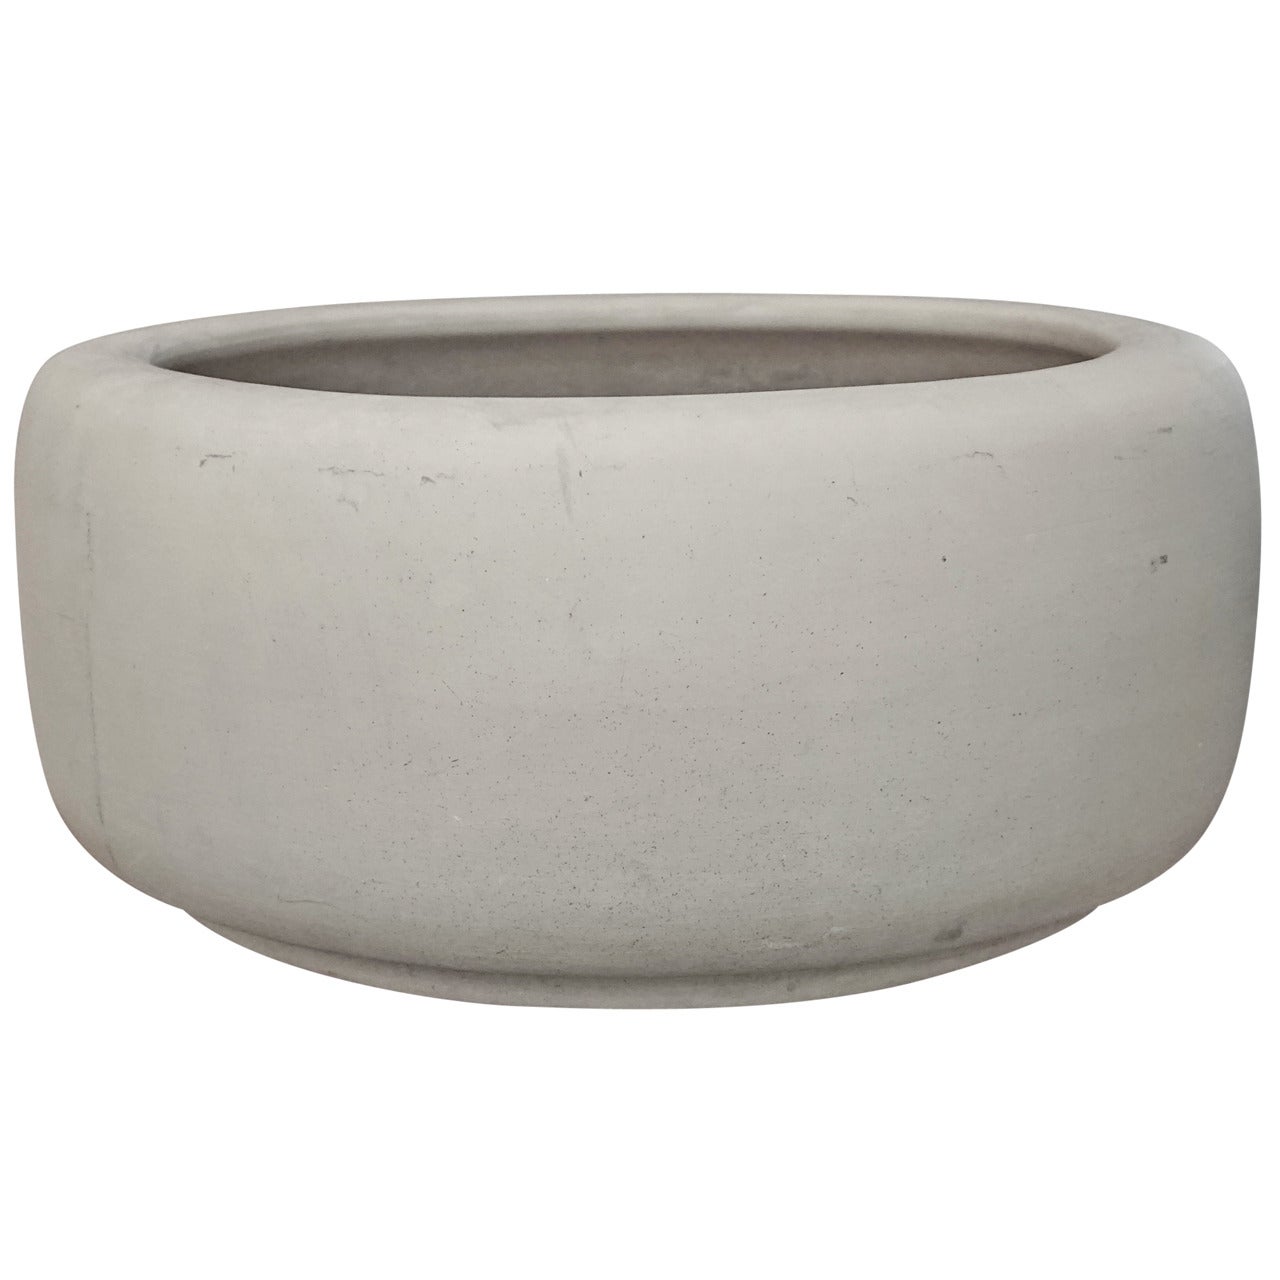 Bisque "Tire" Planter by Architectural Pottery